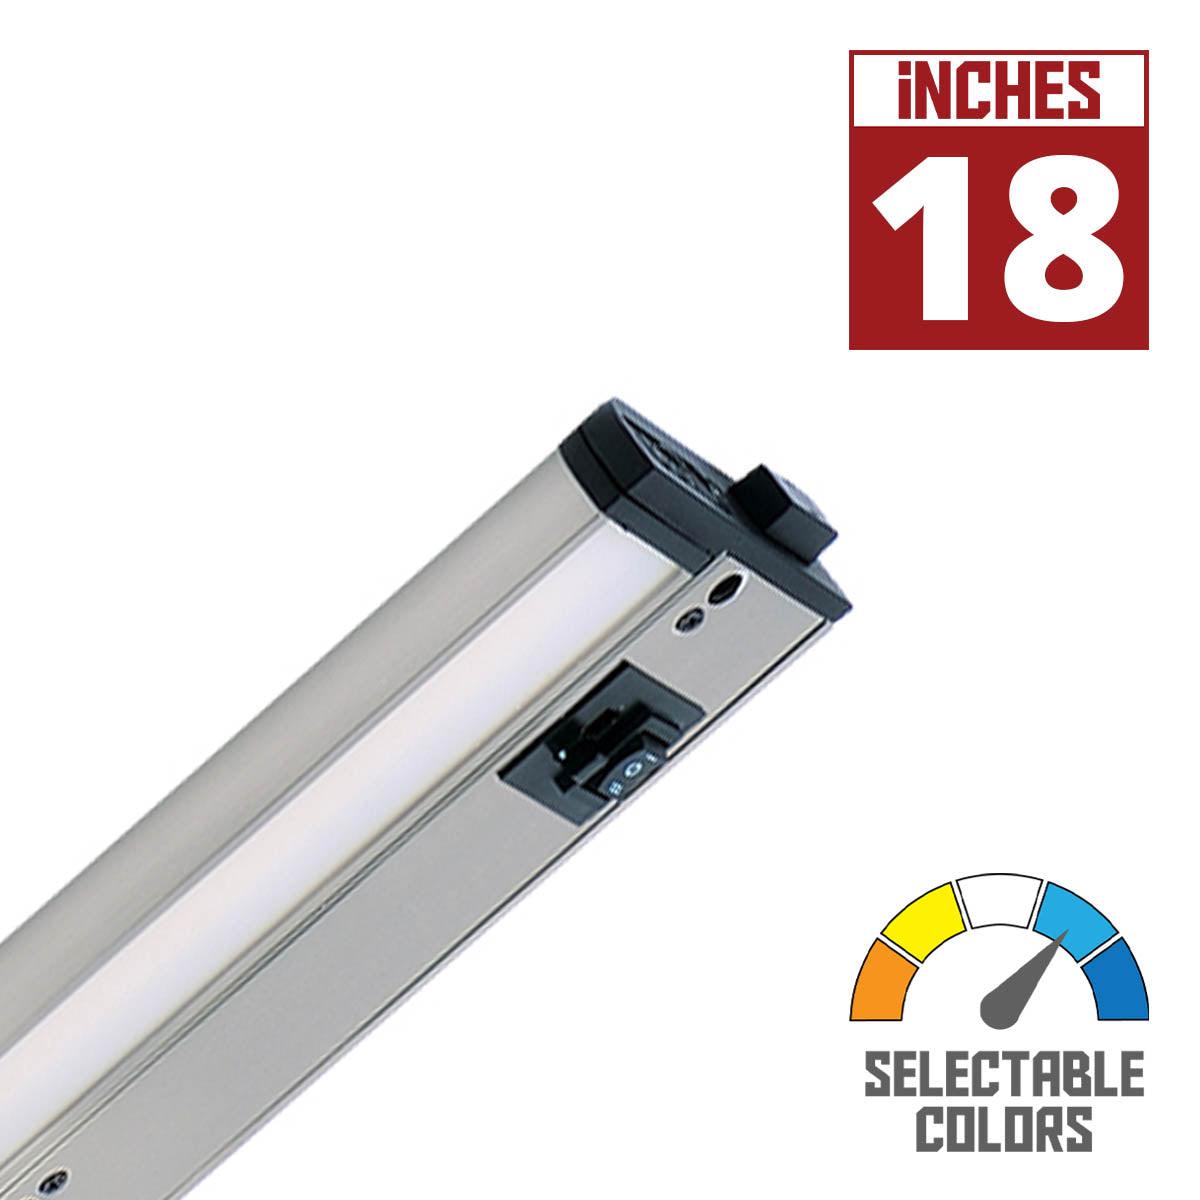 CounterMax 5K 18 Inch Under Cabinet LED Light with Patent gimbals, 1200 Lumens, Linkable, CCT Selectable 2700K to 5000K, 120V - Bees Lighting